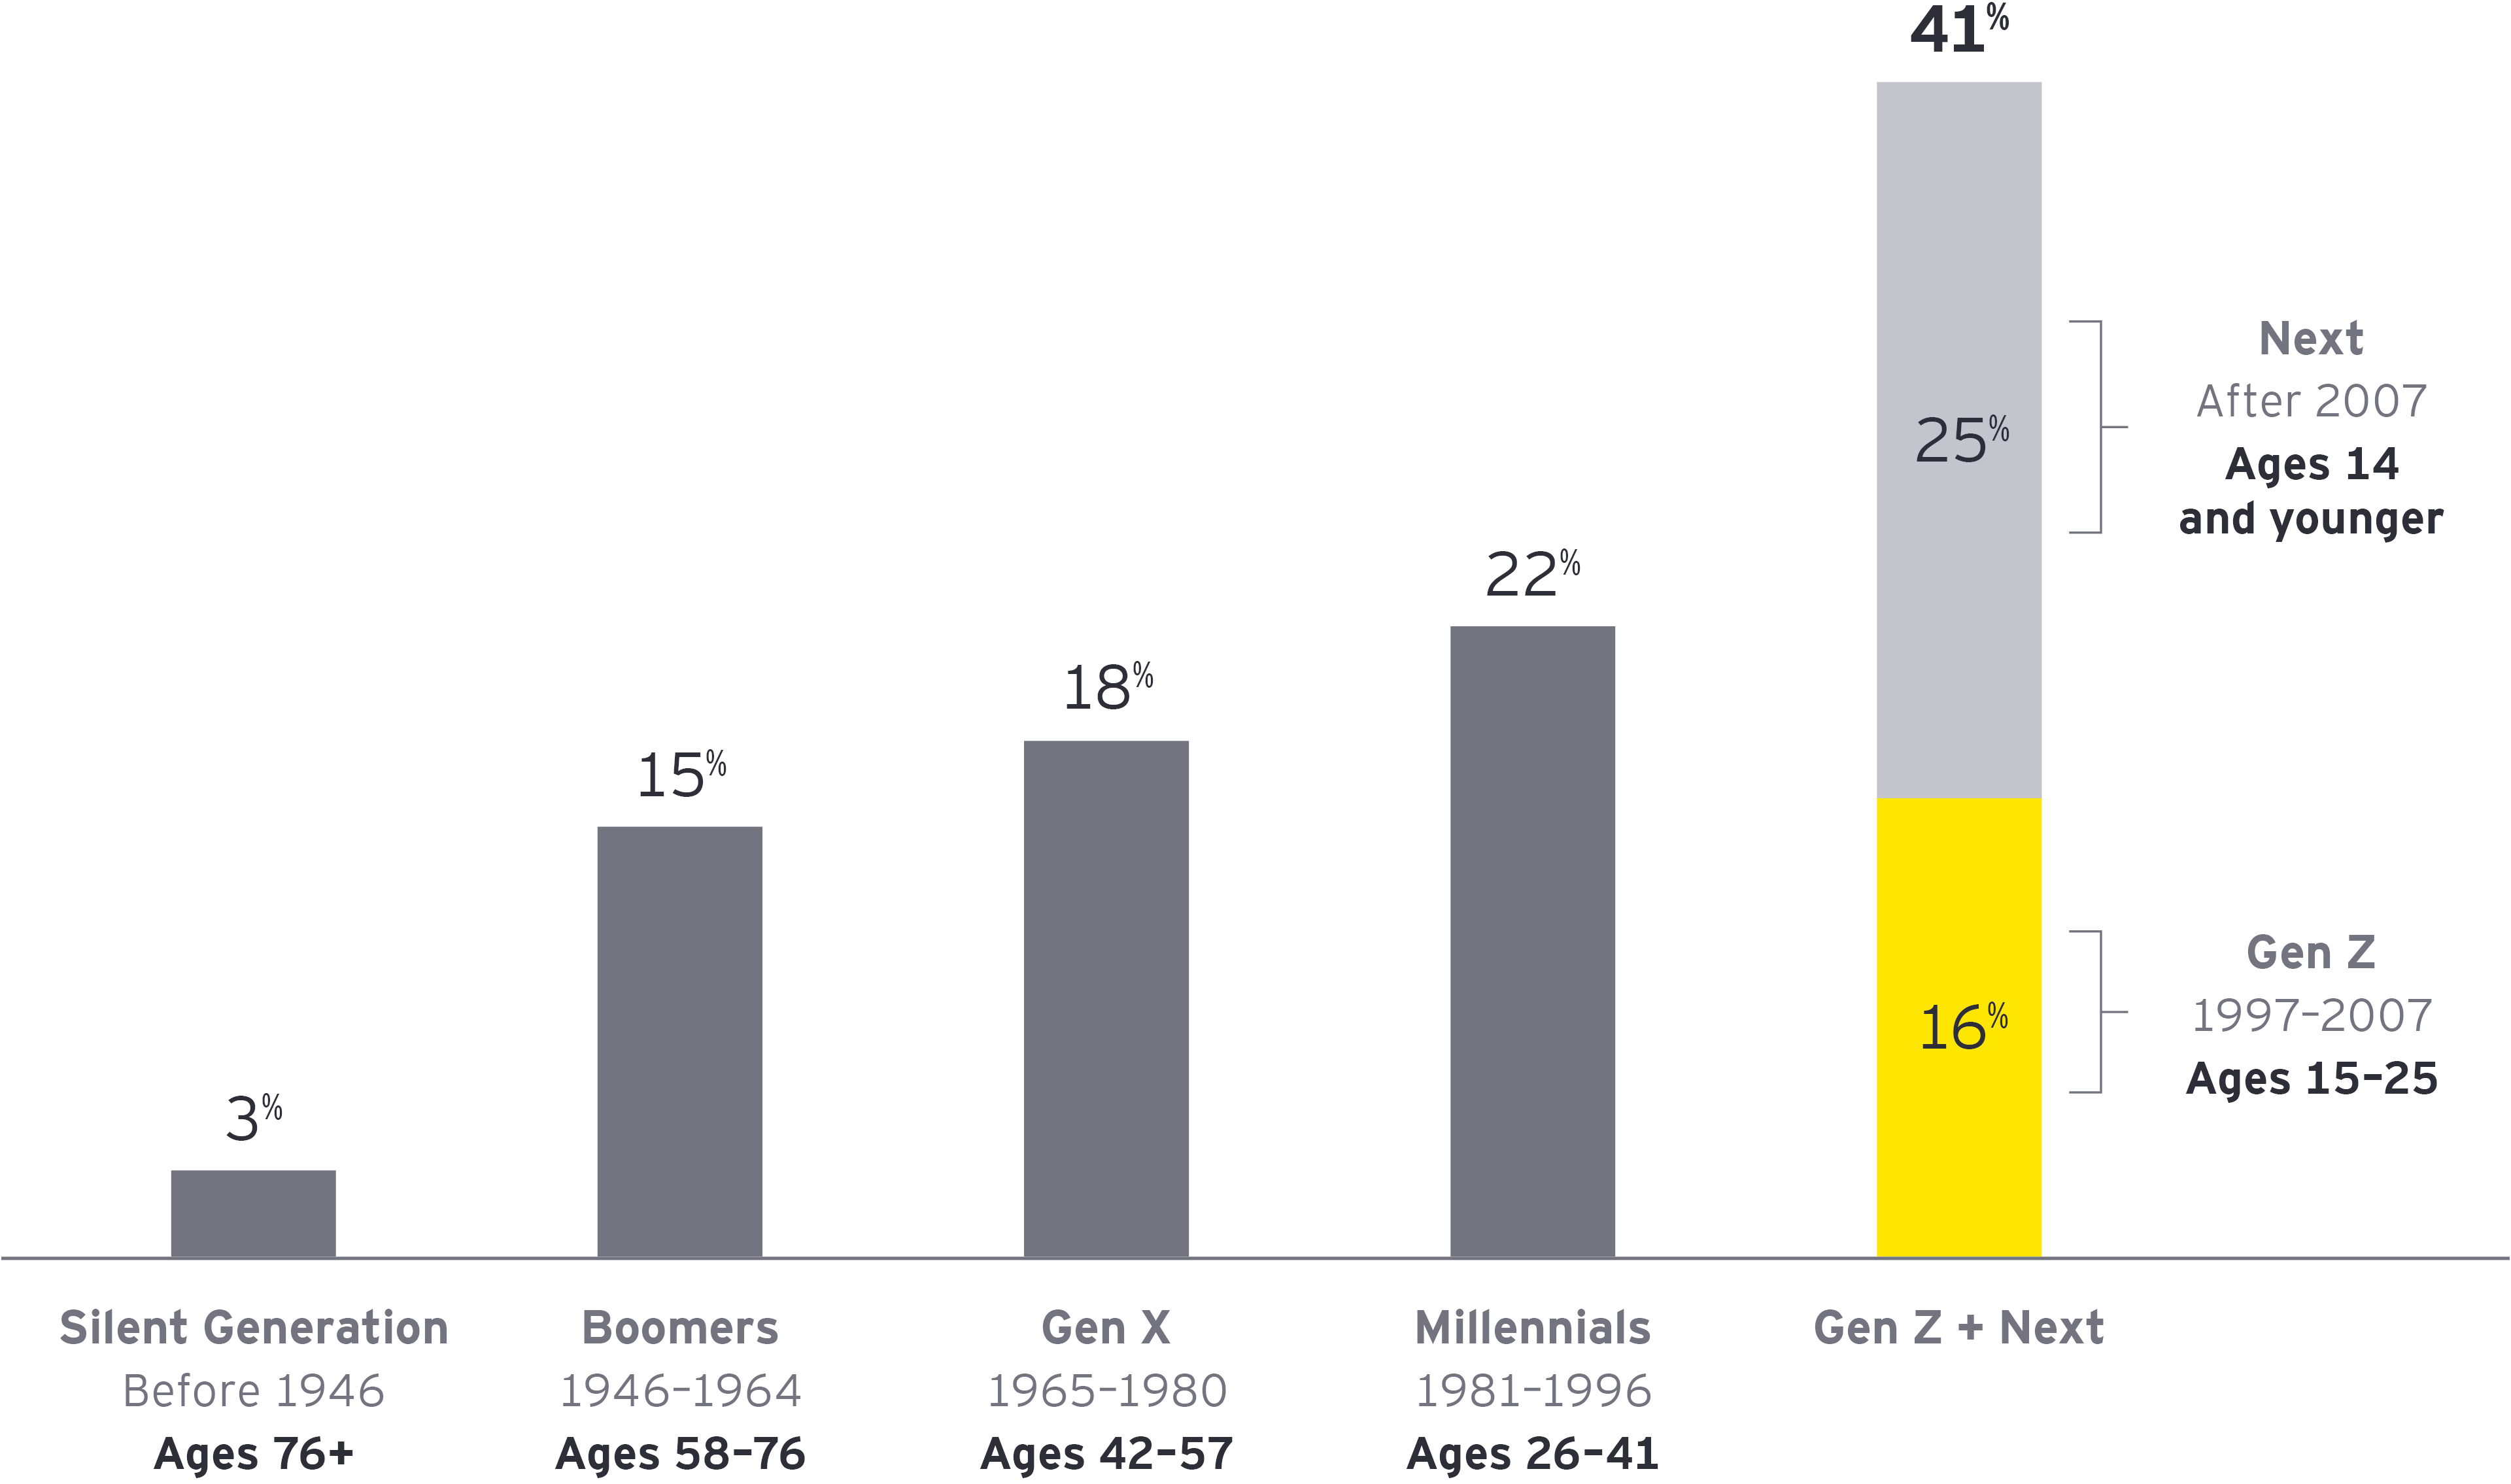 We define Gen Z as those born between 1997 and 2007, making them roughly 15 to 25 years old today. Globally, they represent over 40% of the world’s population.